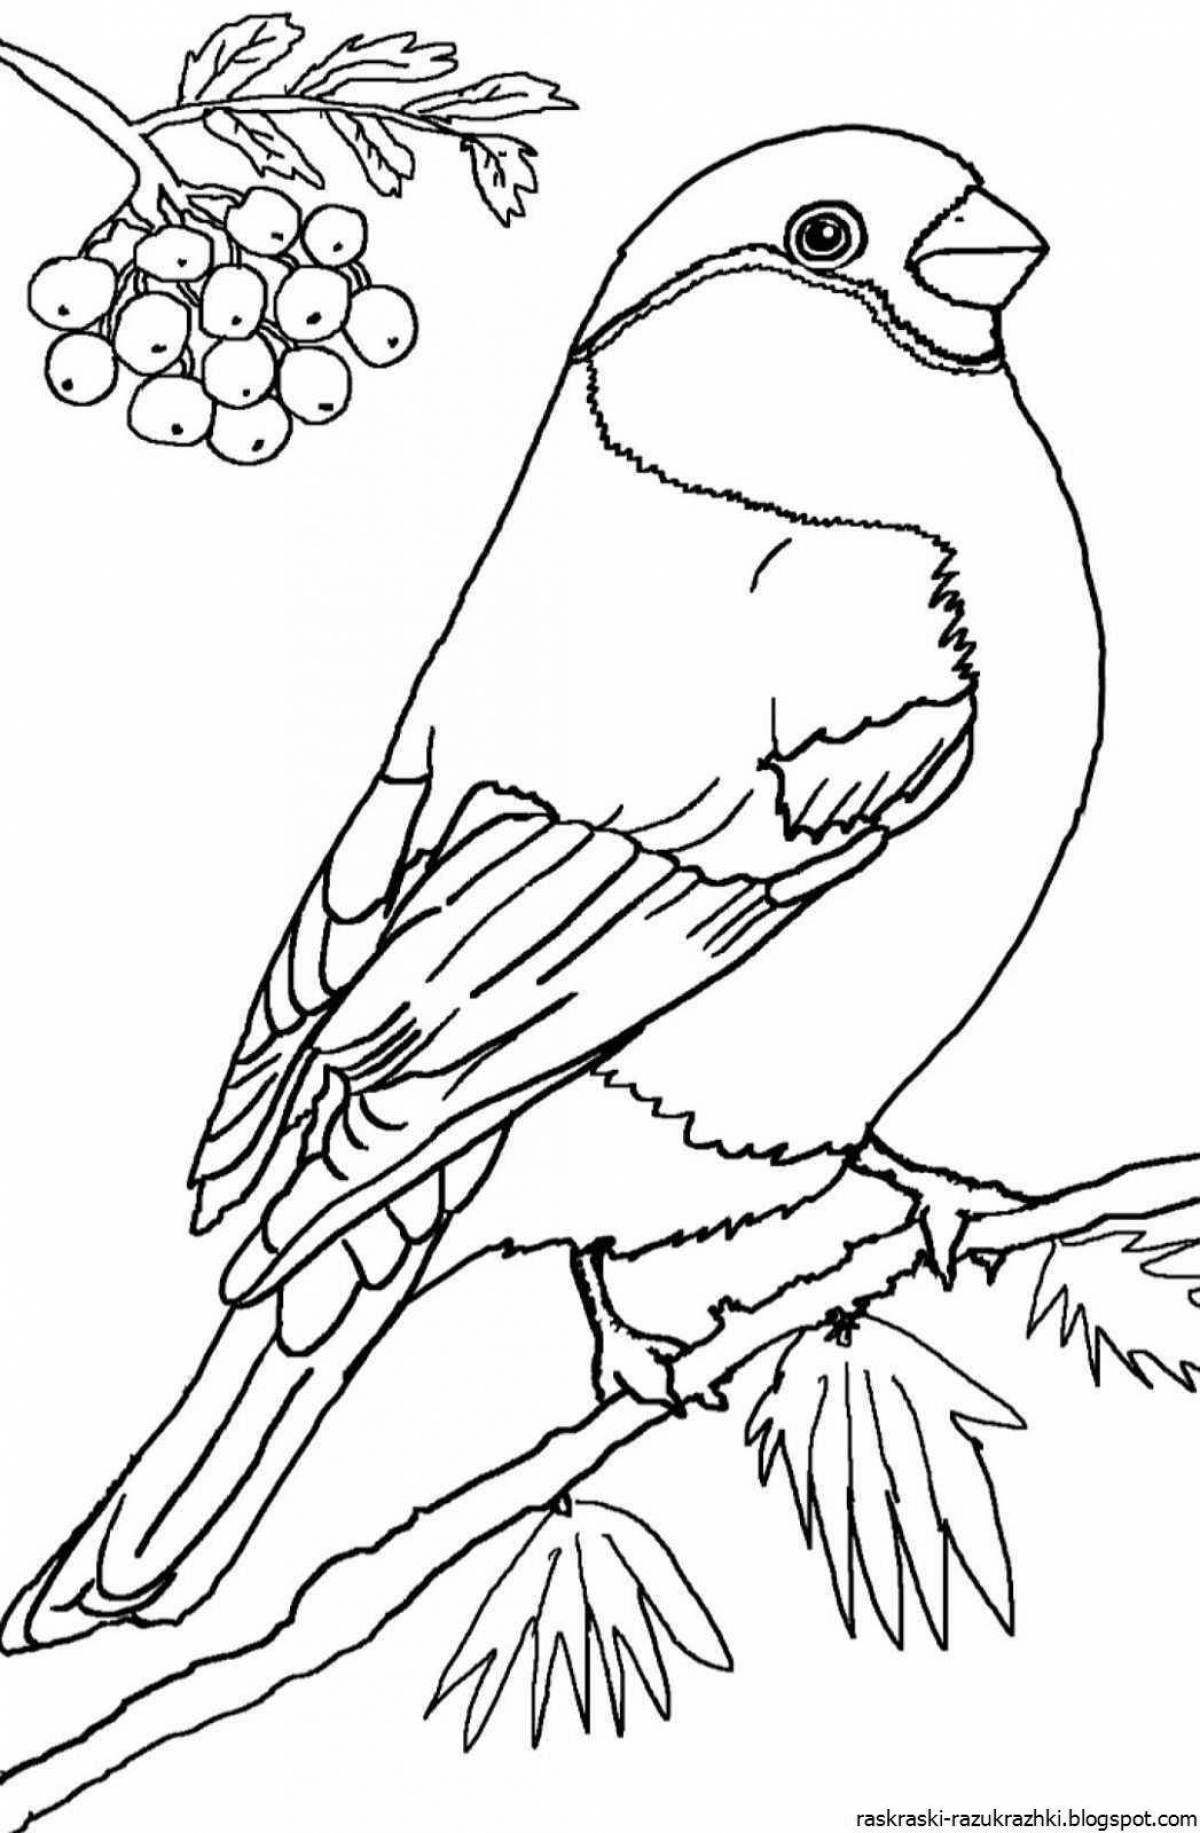 Great drawing of a titmouse for kids